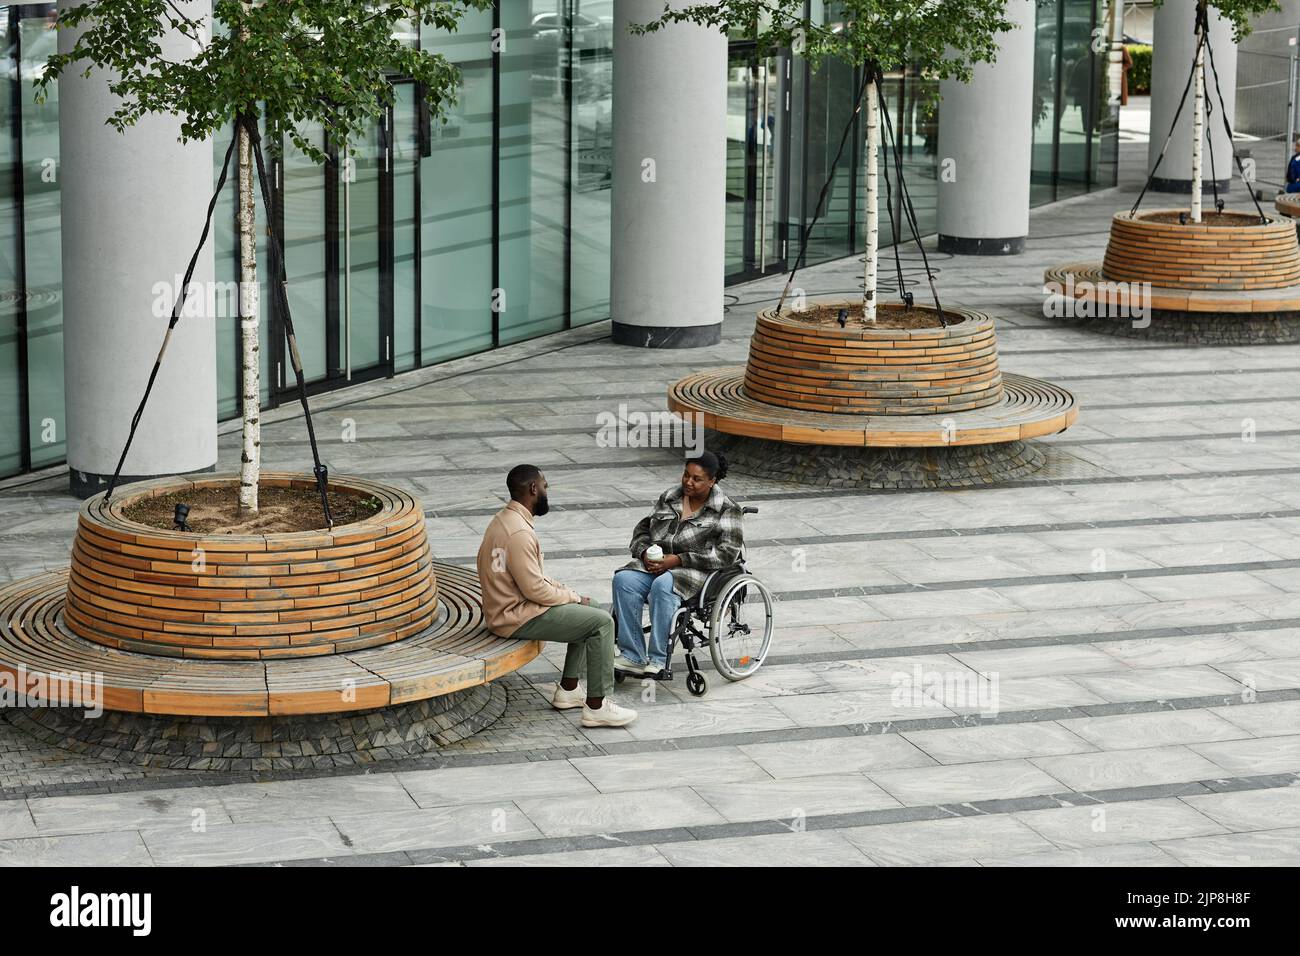 Wide angle view at adult black couple with partner in wheelchair chatting outdoors in city setting, graphic tiled floor, copy space Stock Photo